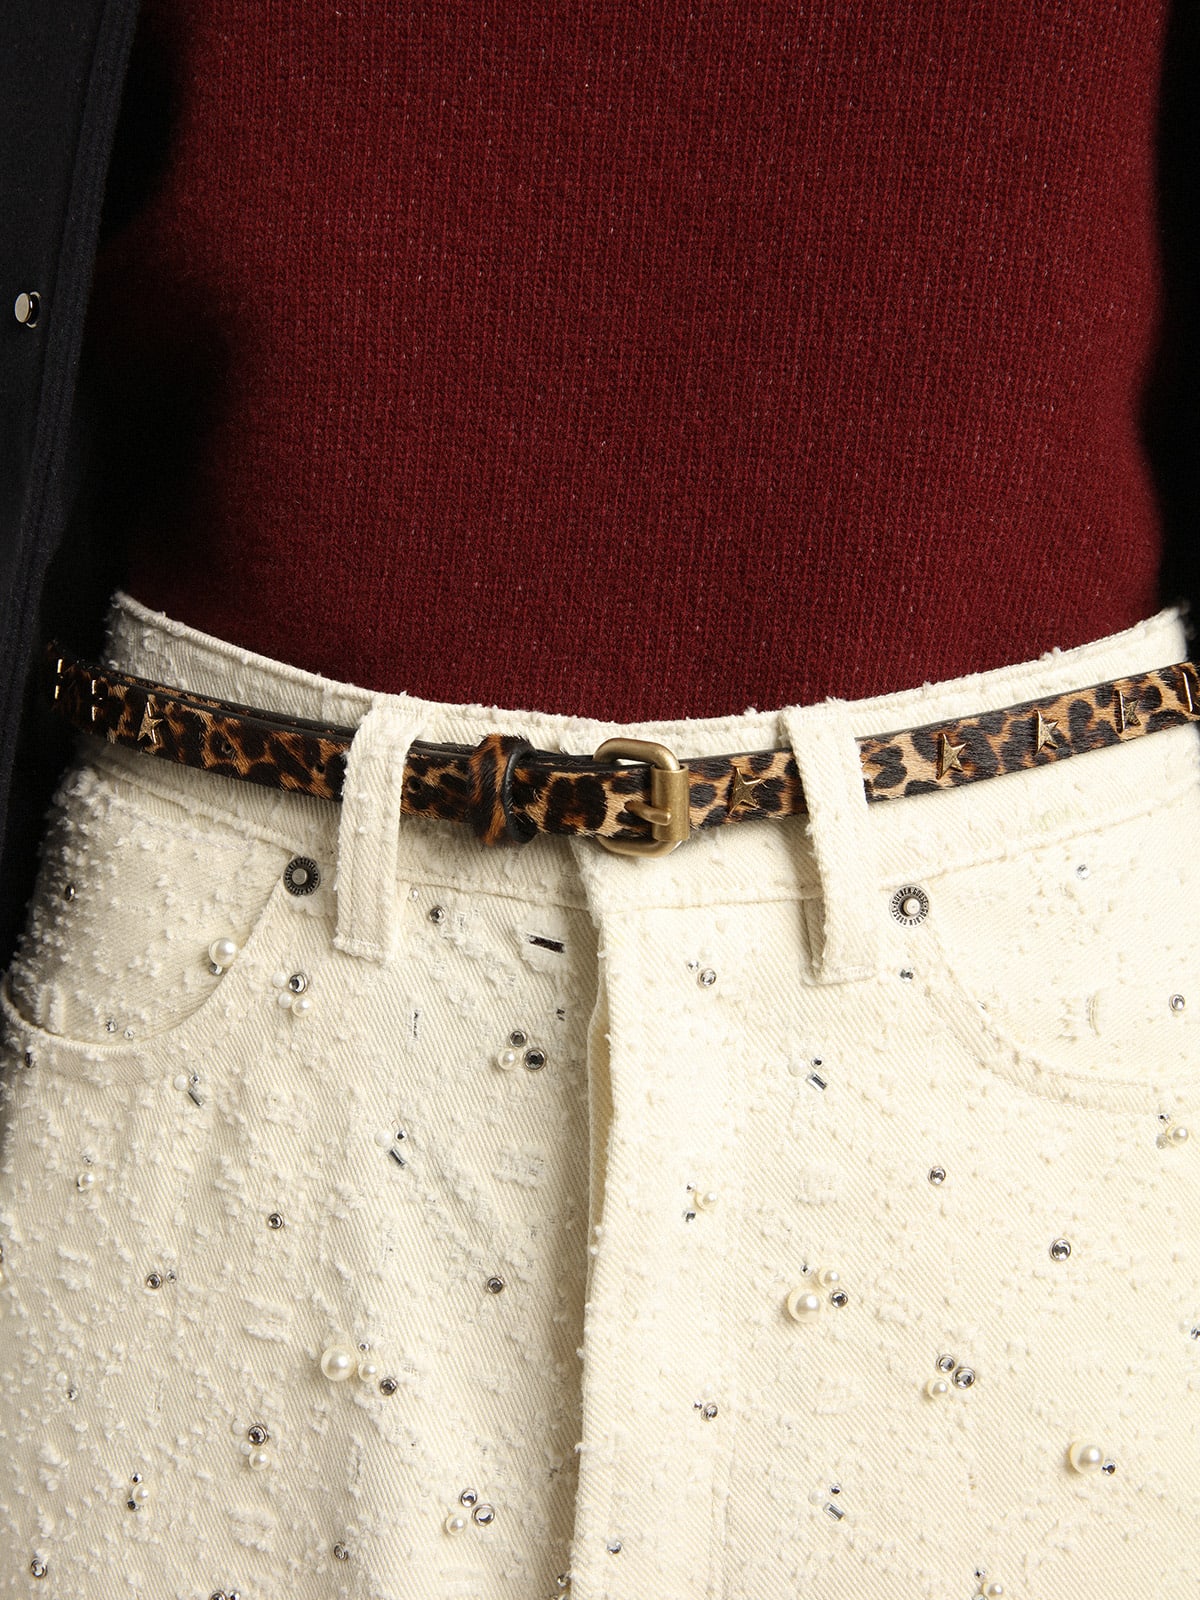 Golden Goose - Women's belt in black and brown leopard print pony skin with studs in 